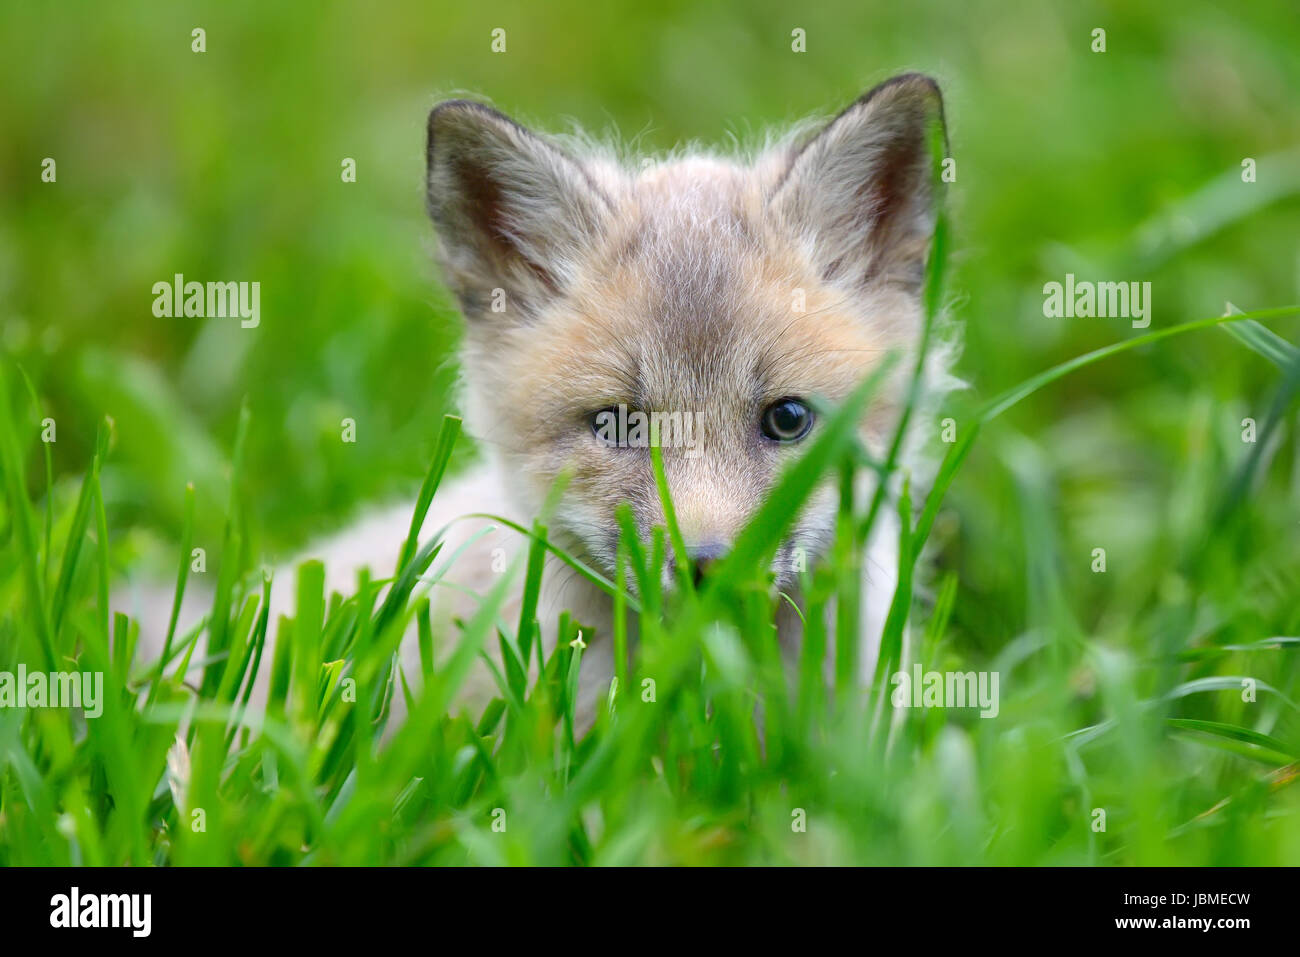 Close up baby silver fox in grass Stock Photo